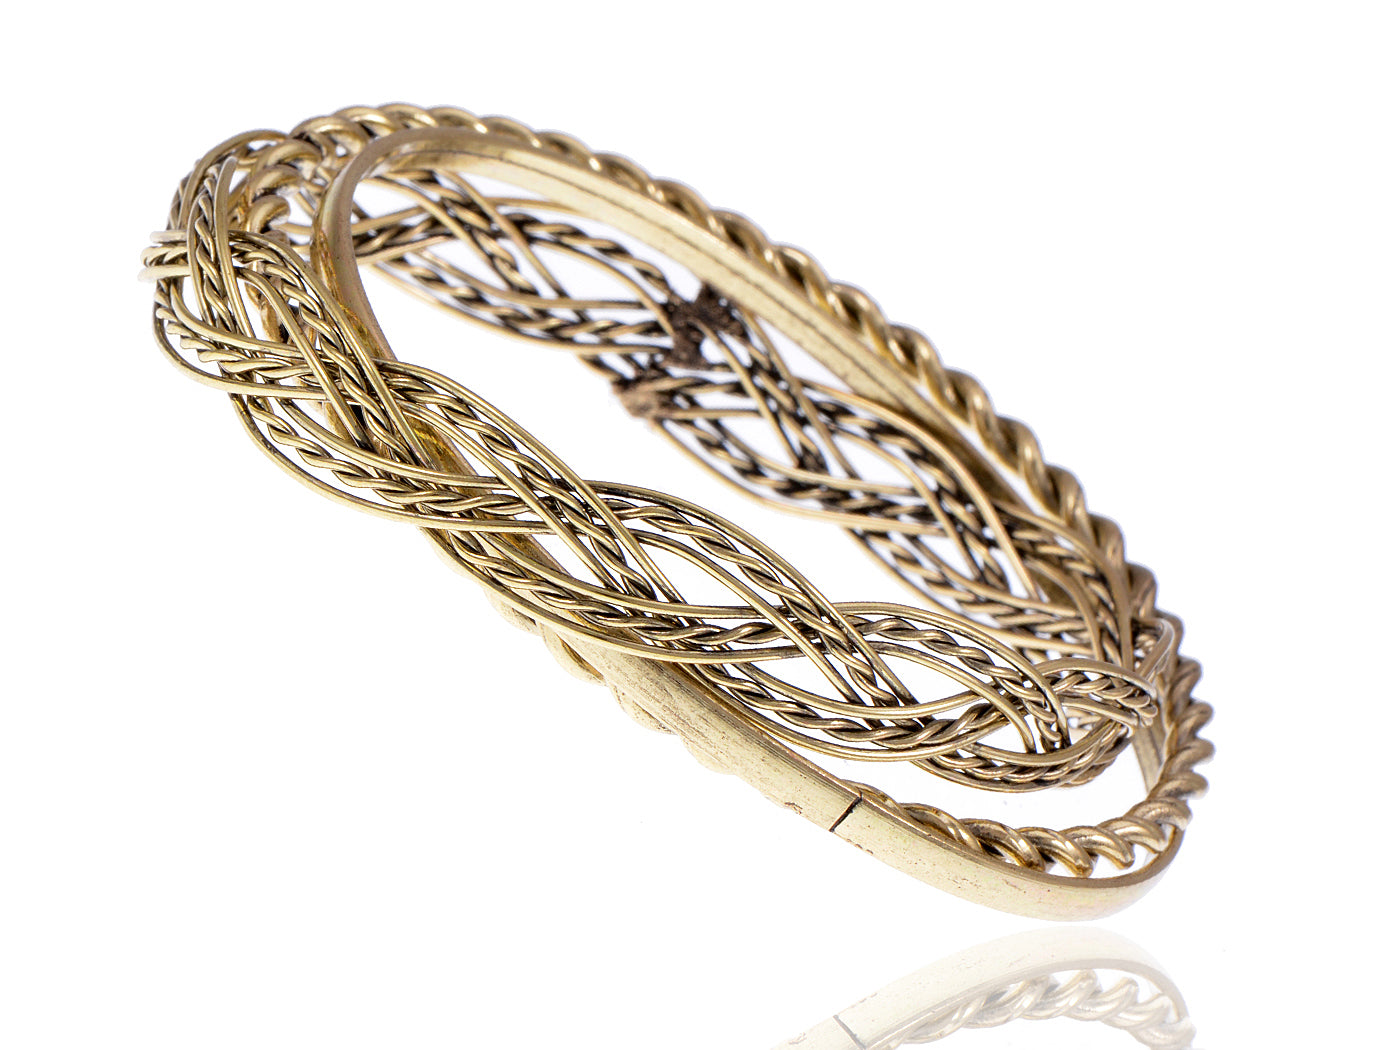 Antique Trio Of Bangles With Braids Twists And Weaves